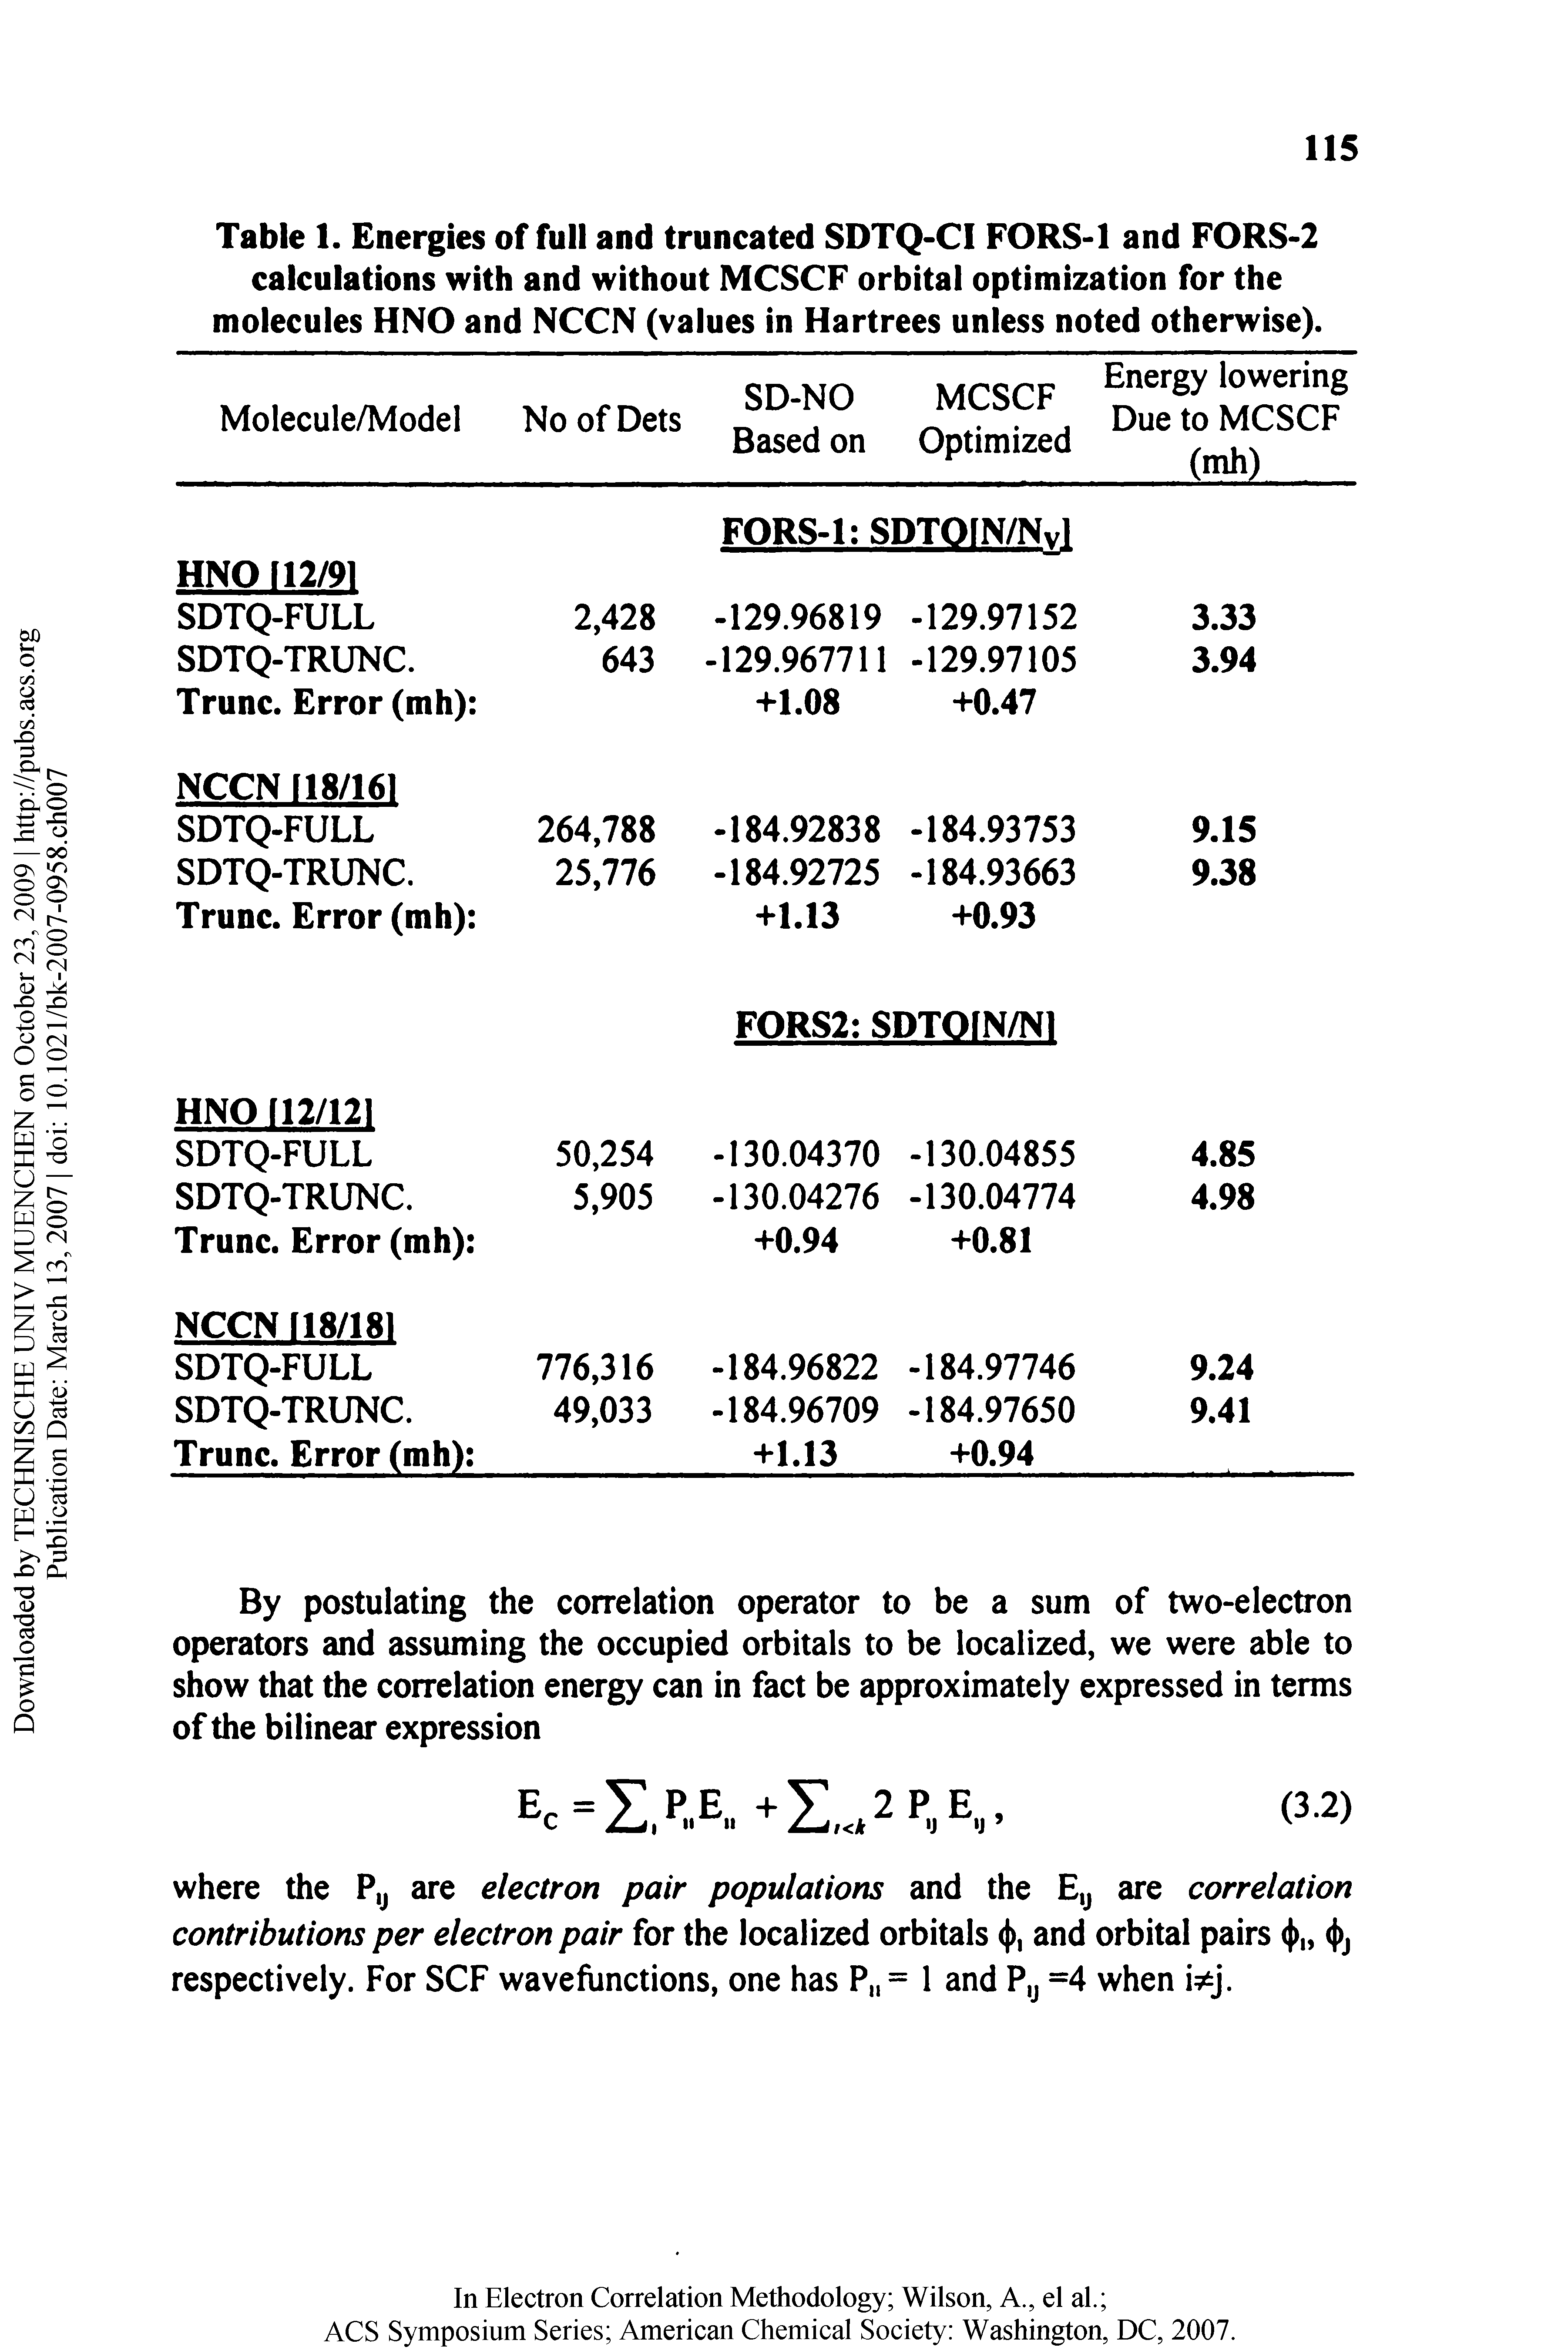 Table 1. Energies of full and truncated SDTQ-Cl FORS-1 and FORS-2 calculations with and without MCSCF orbital optimization for the molecules HNO and NCCN (values in Hartrees unless noted otherwise).